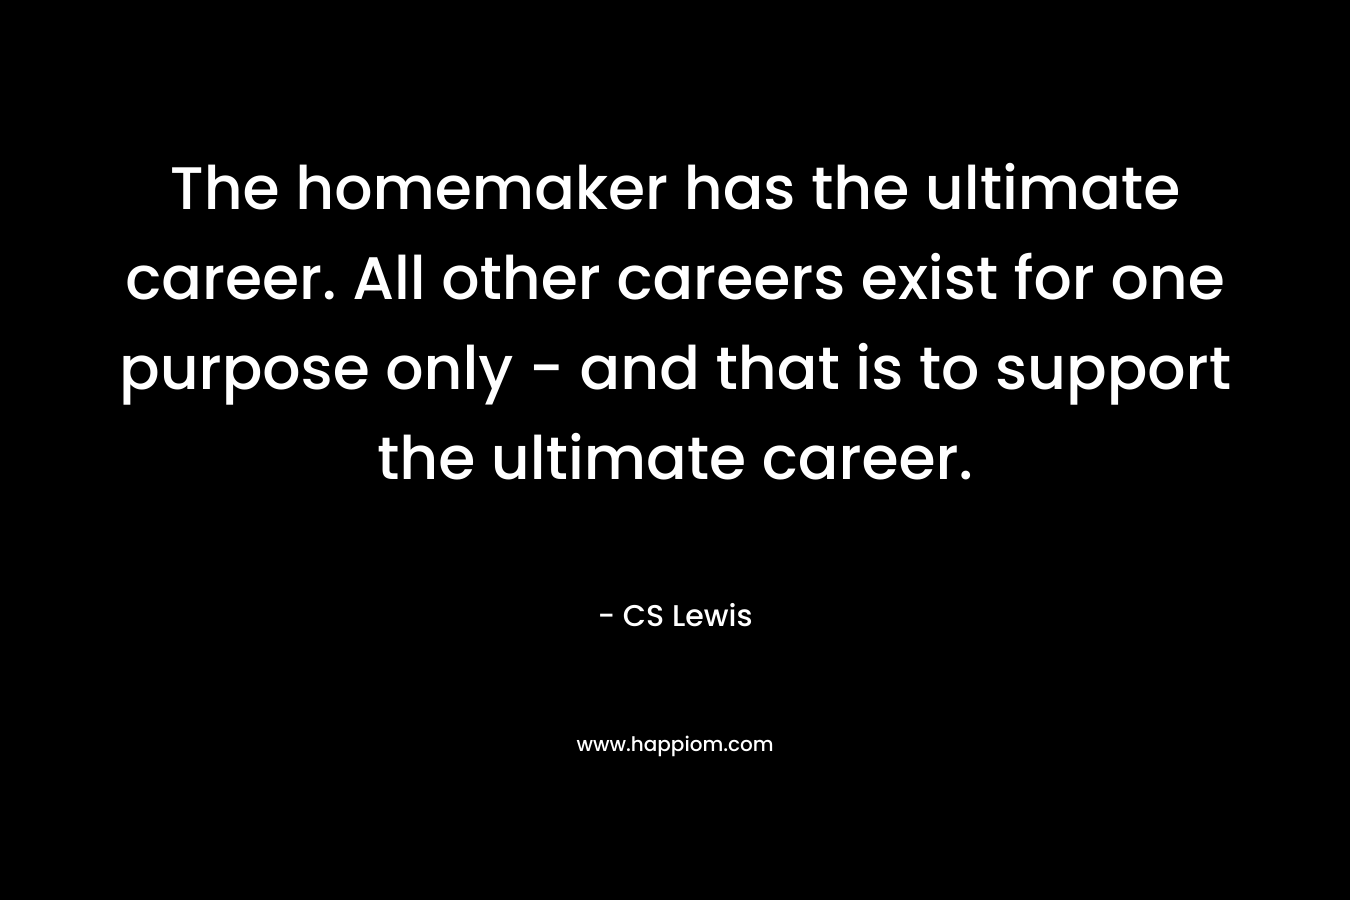 The homemaker has the ultimate career. All other careers exist for one purpose only - and that is to support the ultimate career. 